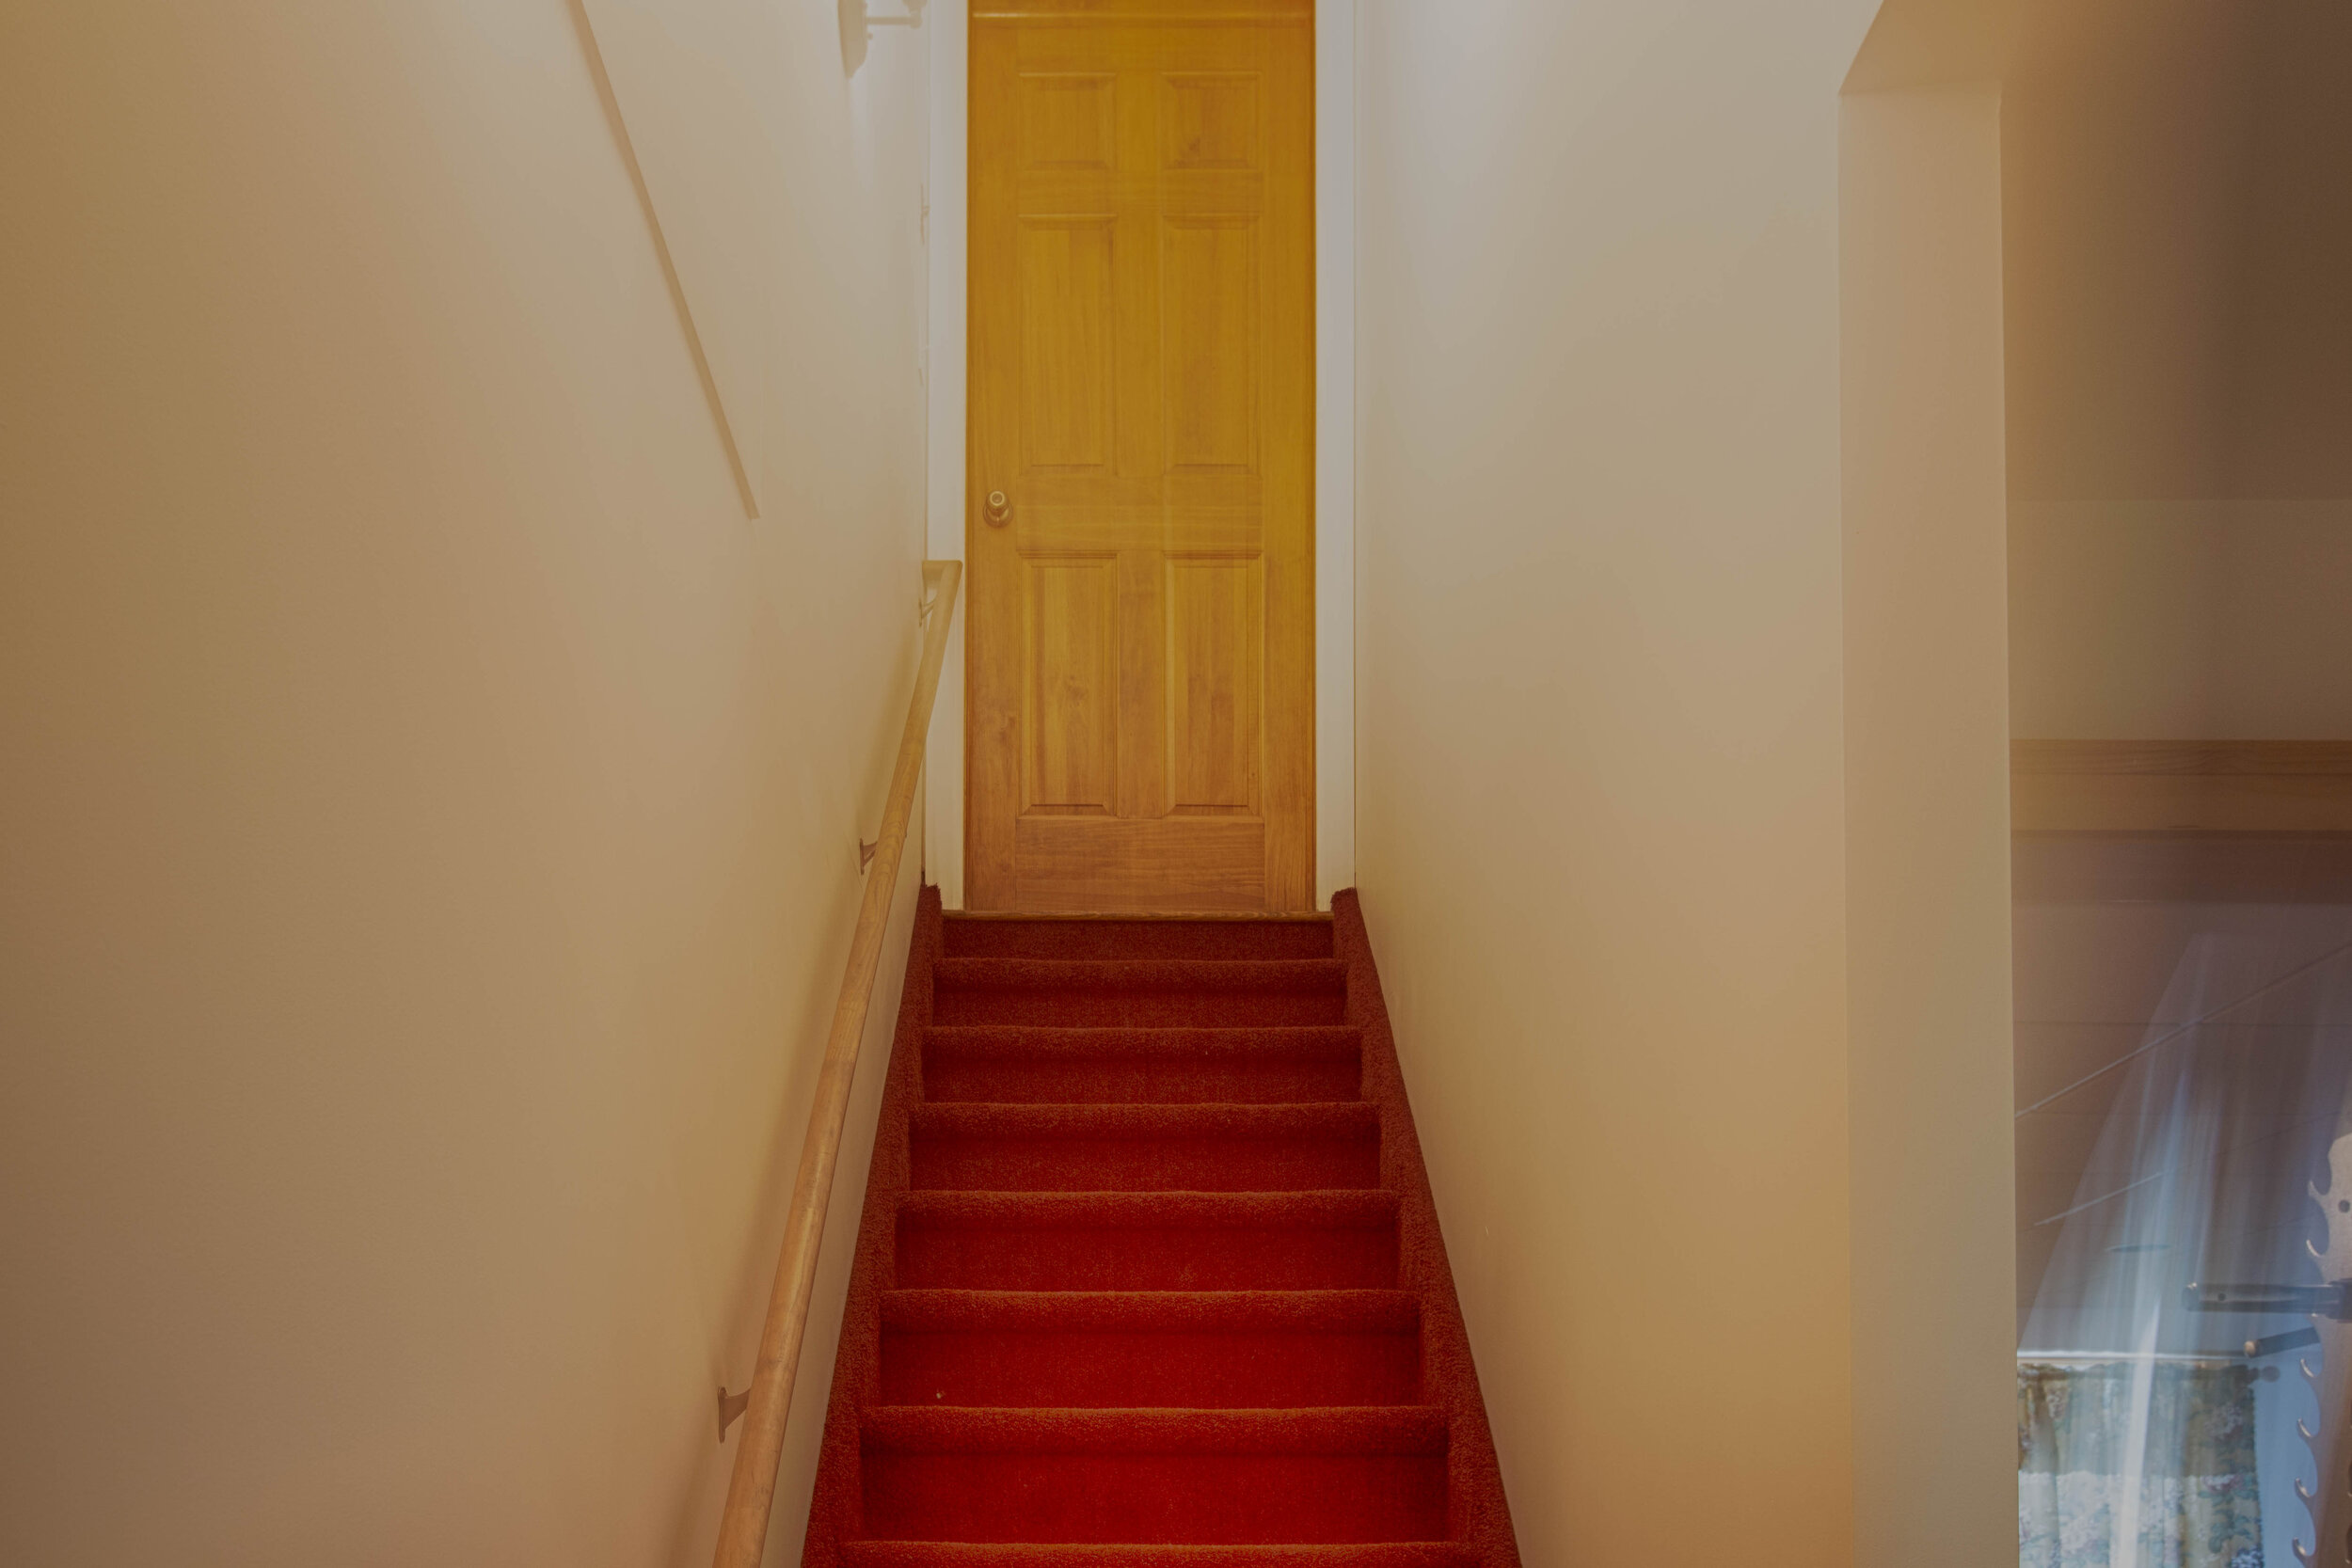  Picture of the stairs with red carpeting that lead up from the basement. 